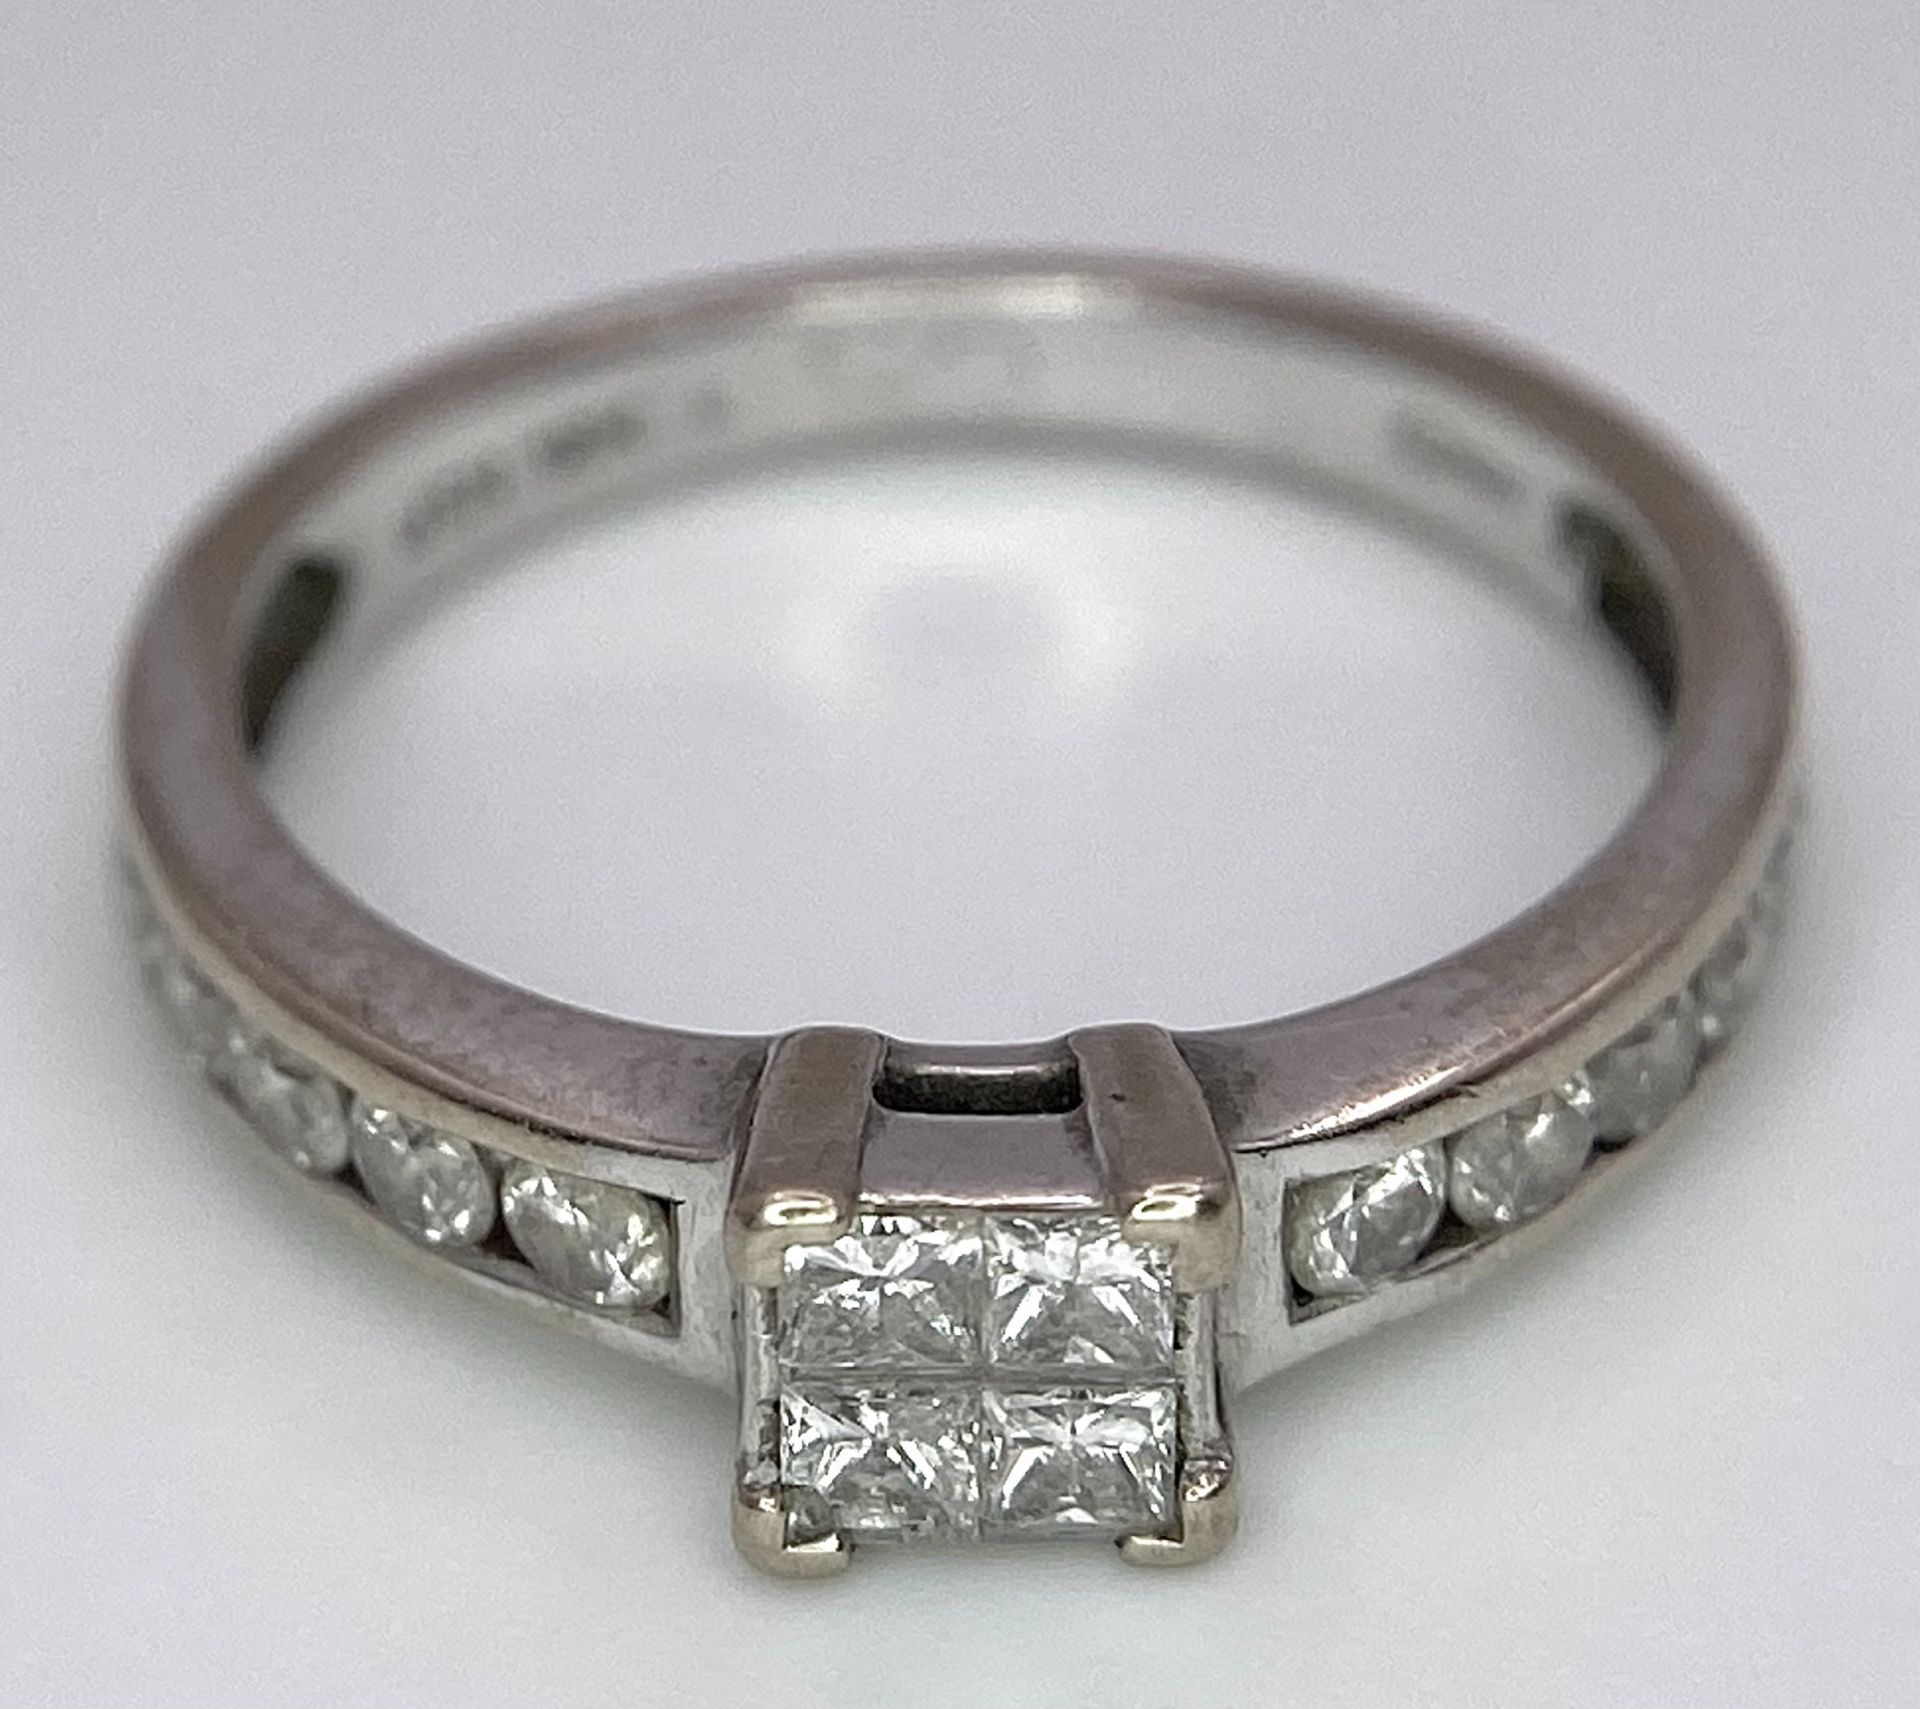 An 18K White Gold and Diamond Ring. Square and round cut diamonds. Size J. 2.6g total weight. - Image 3 of 7